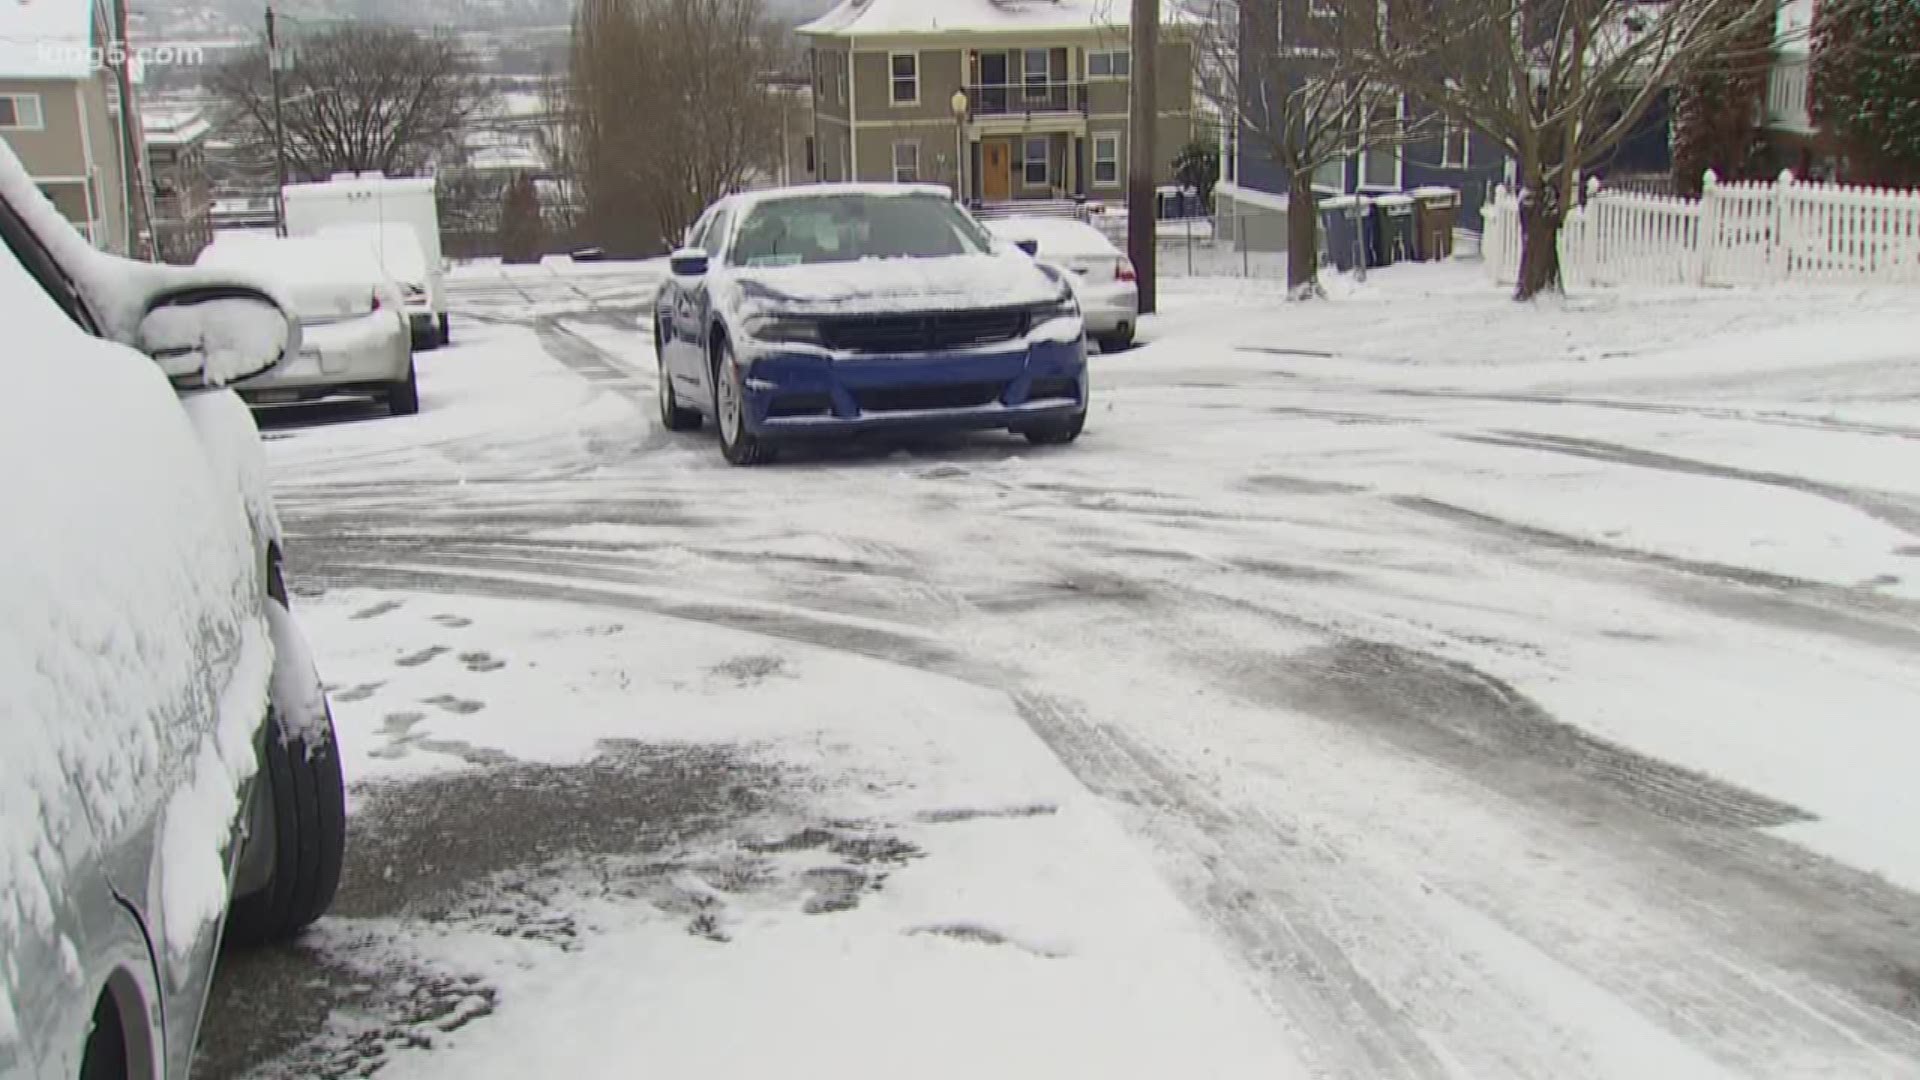 Drivers in Tacoma hope the commute home is better than this morning's. The snow reminded drivers it doesn't take much to cause problems. South Bureau Chief Drew Mikkelsen was live in one of many trouble spots for Tacoma drivers.